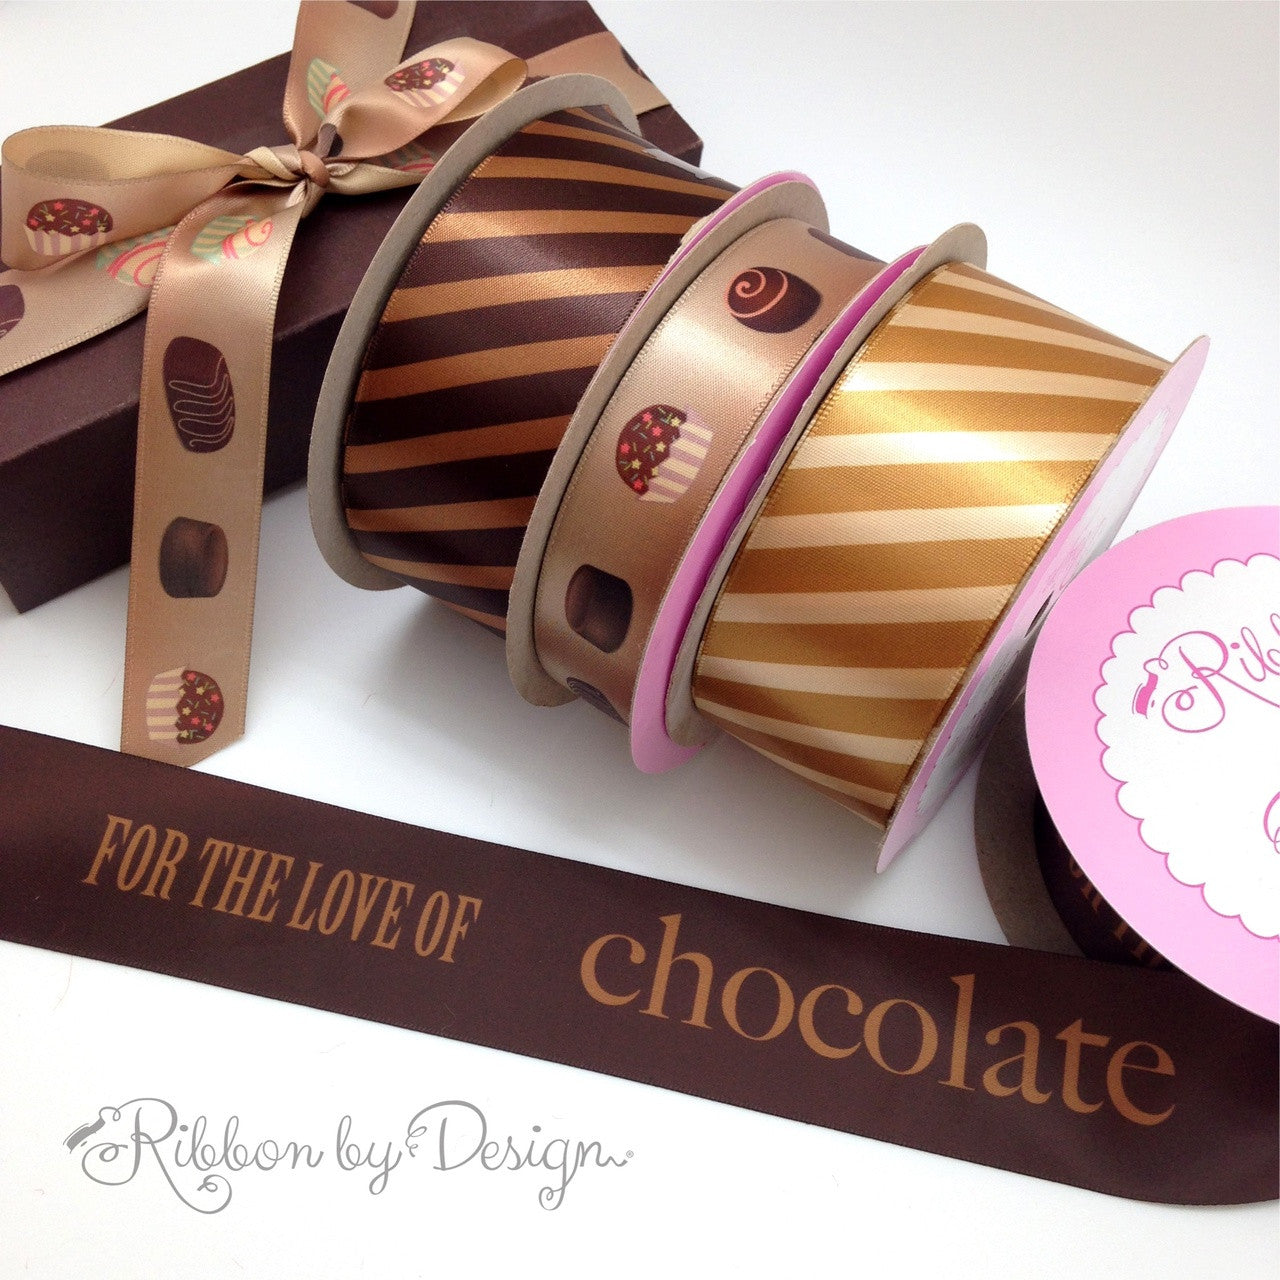 Is there anything better than chocolate and caramel? Mix and match our chocolate and caramel ribbons for a real sweet treat!